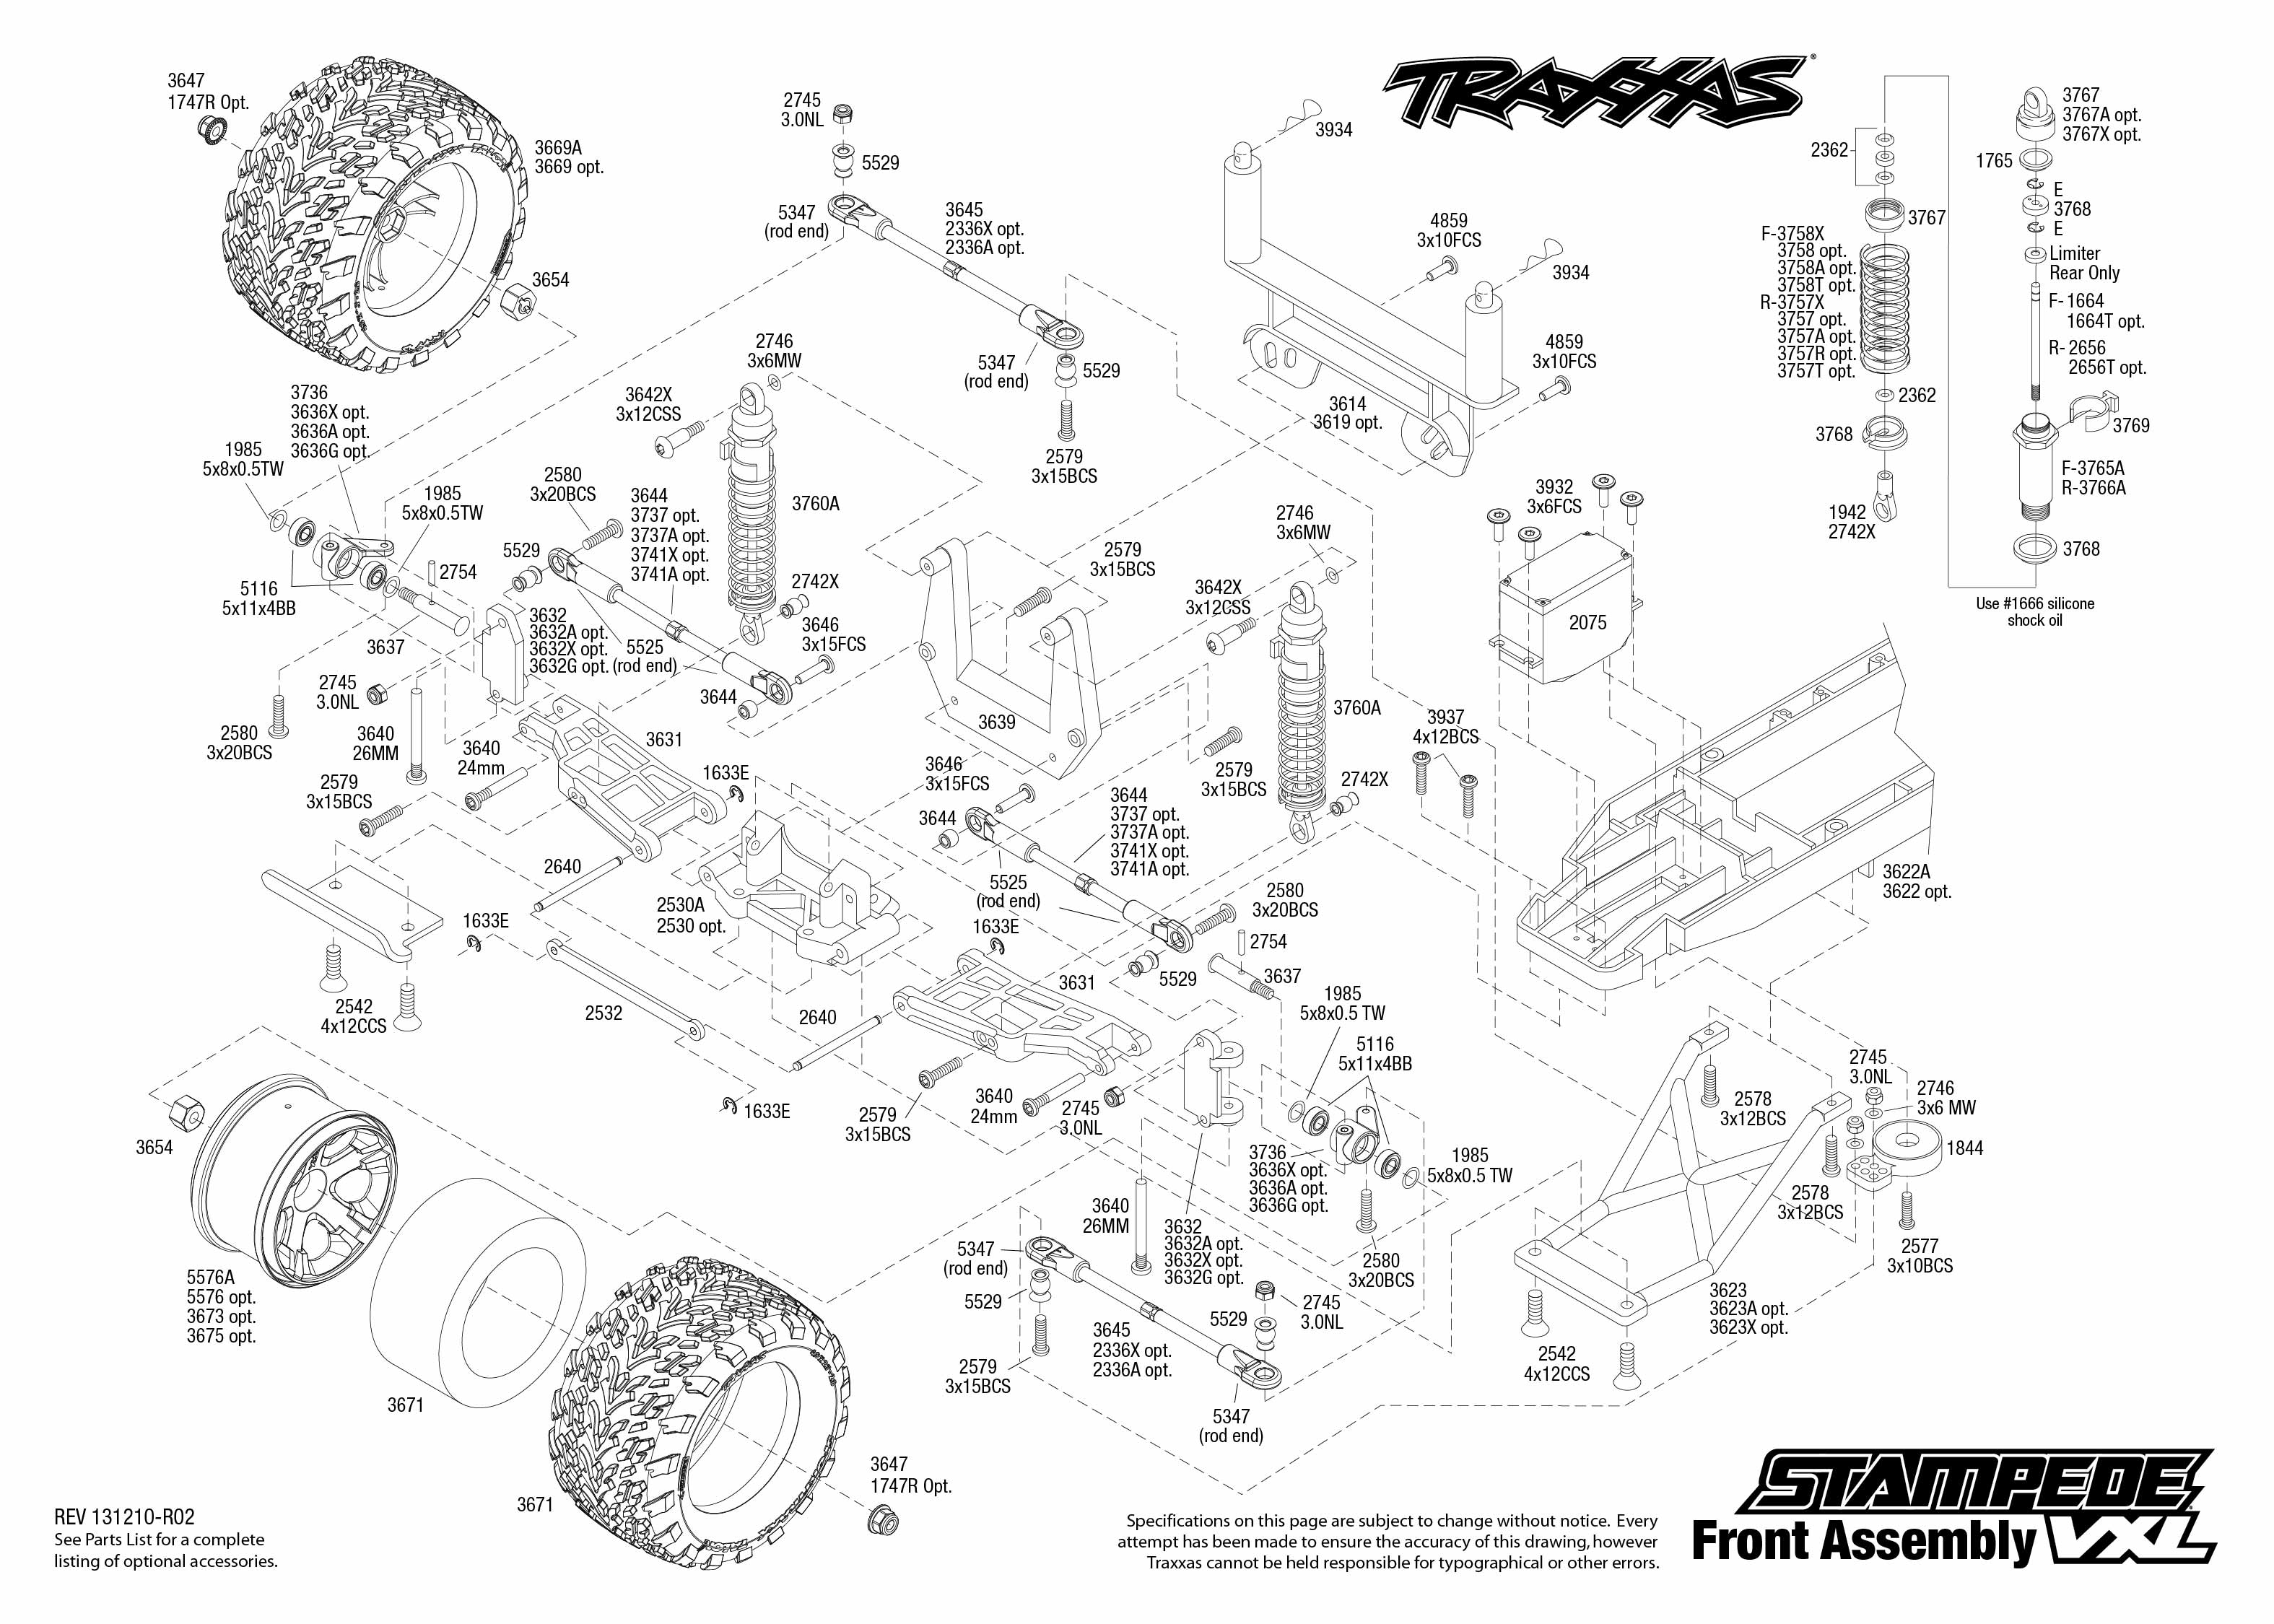 Traxxas - Stampede VXL - Exploded Views - Page 2